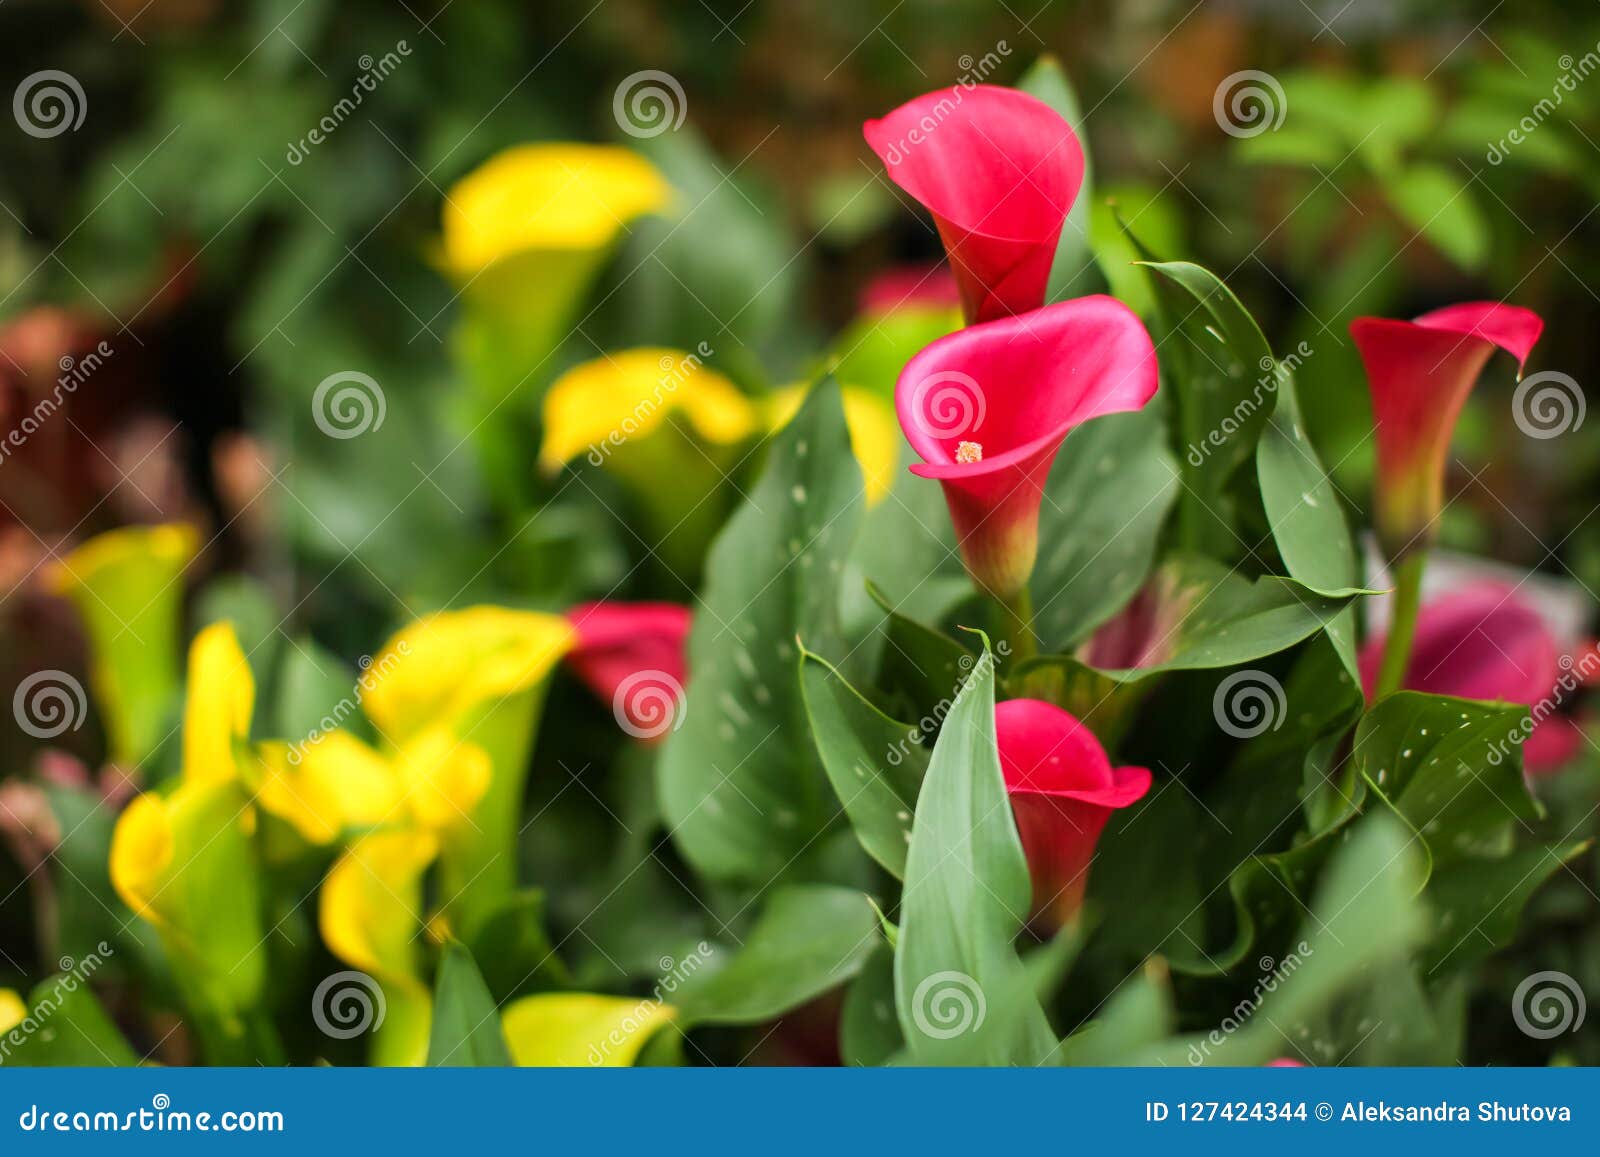 Pink and Yellow Calla Lily Flowers in Bloom on Display at the Farmers ...